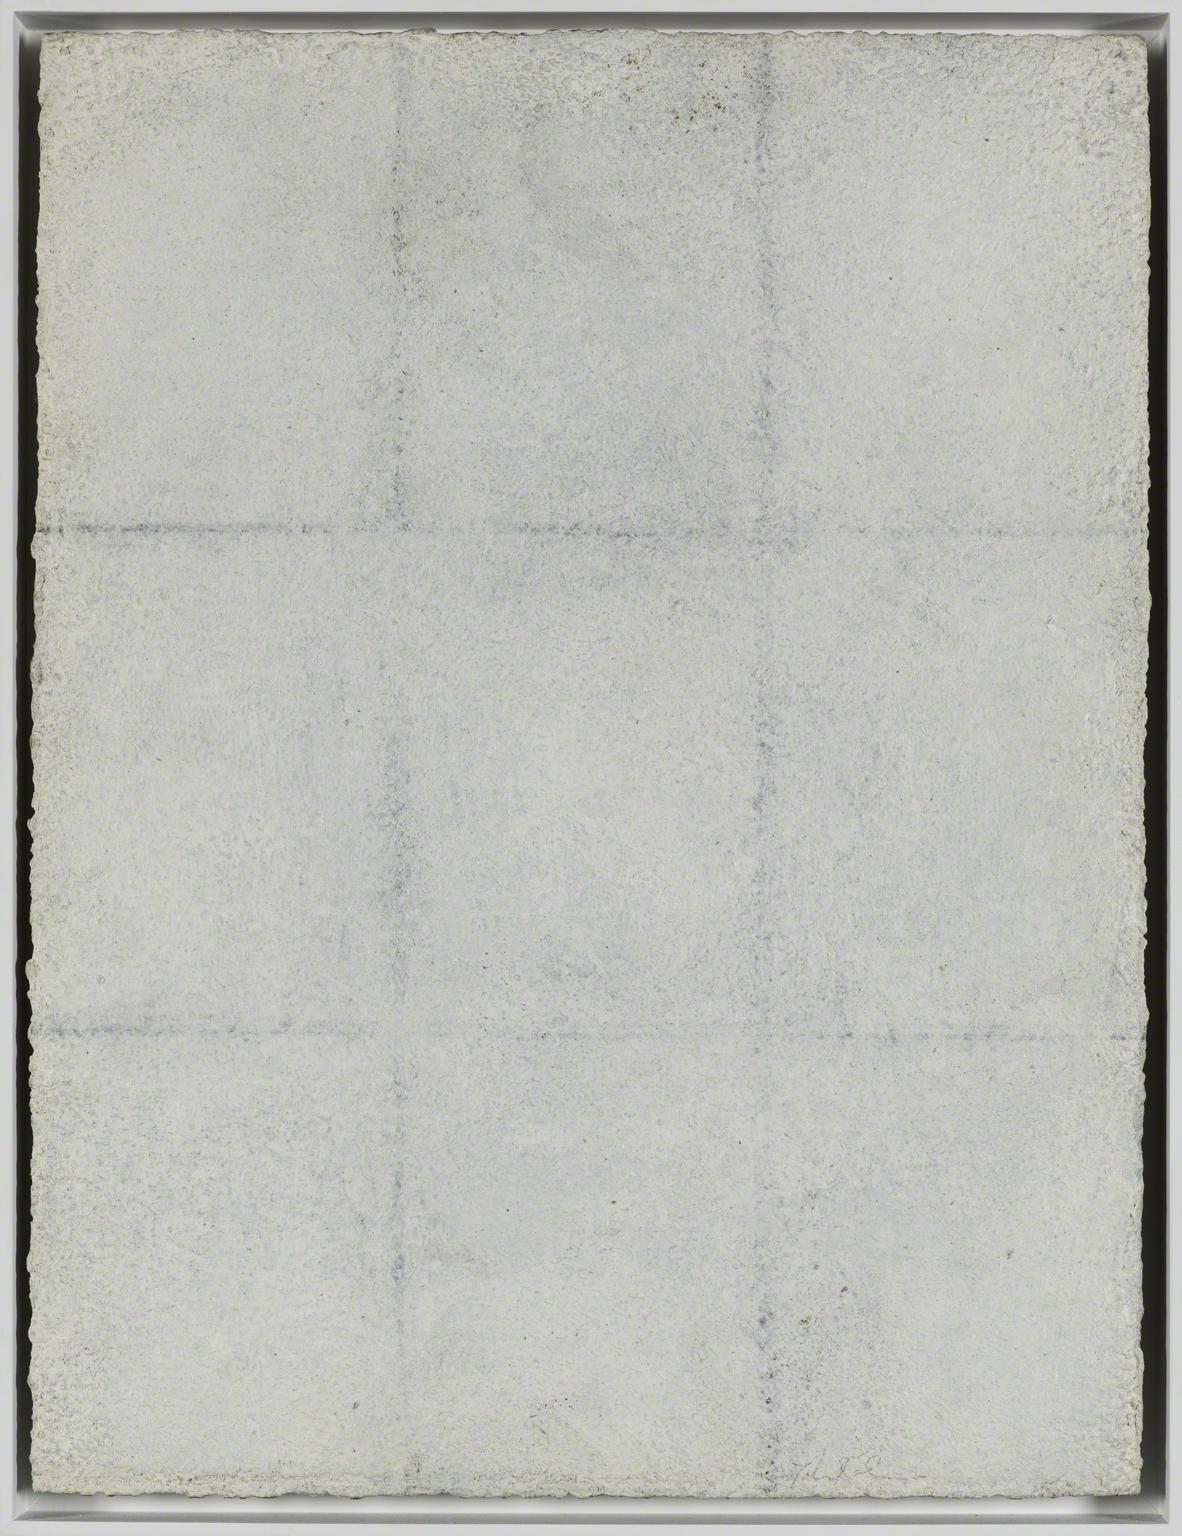 Small white painting divided into a grid of nine rectangles by faint, dark lines